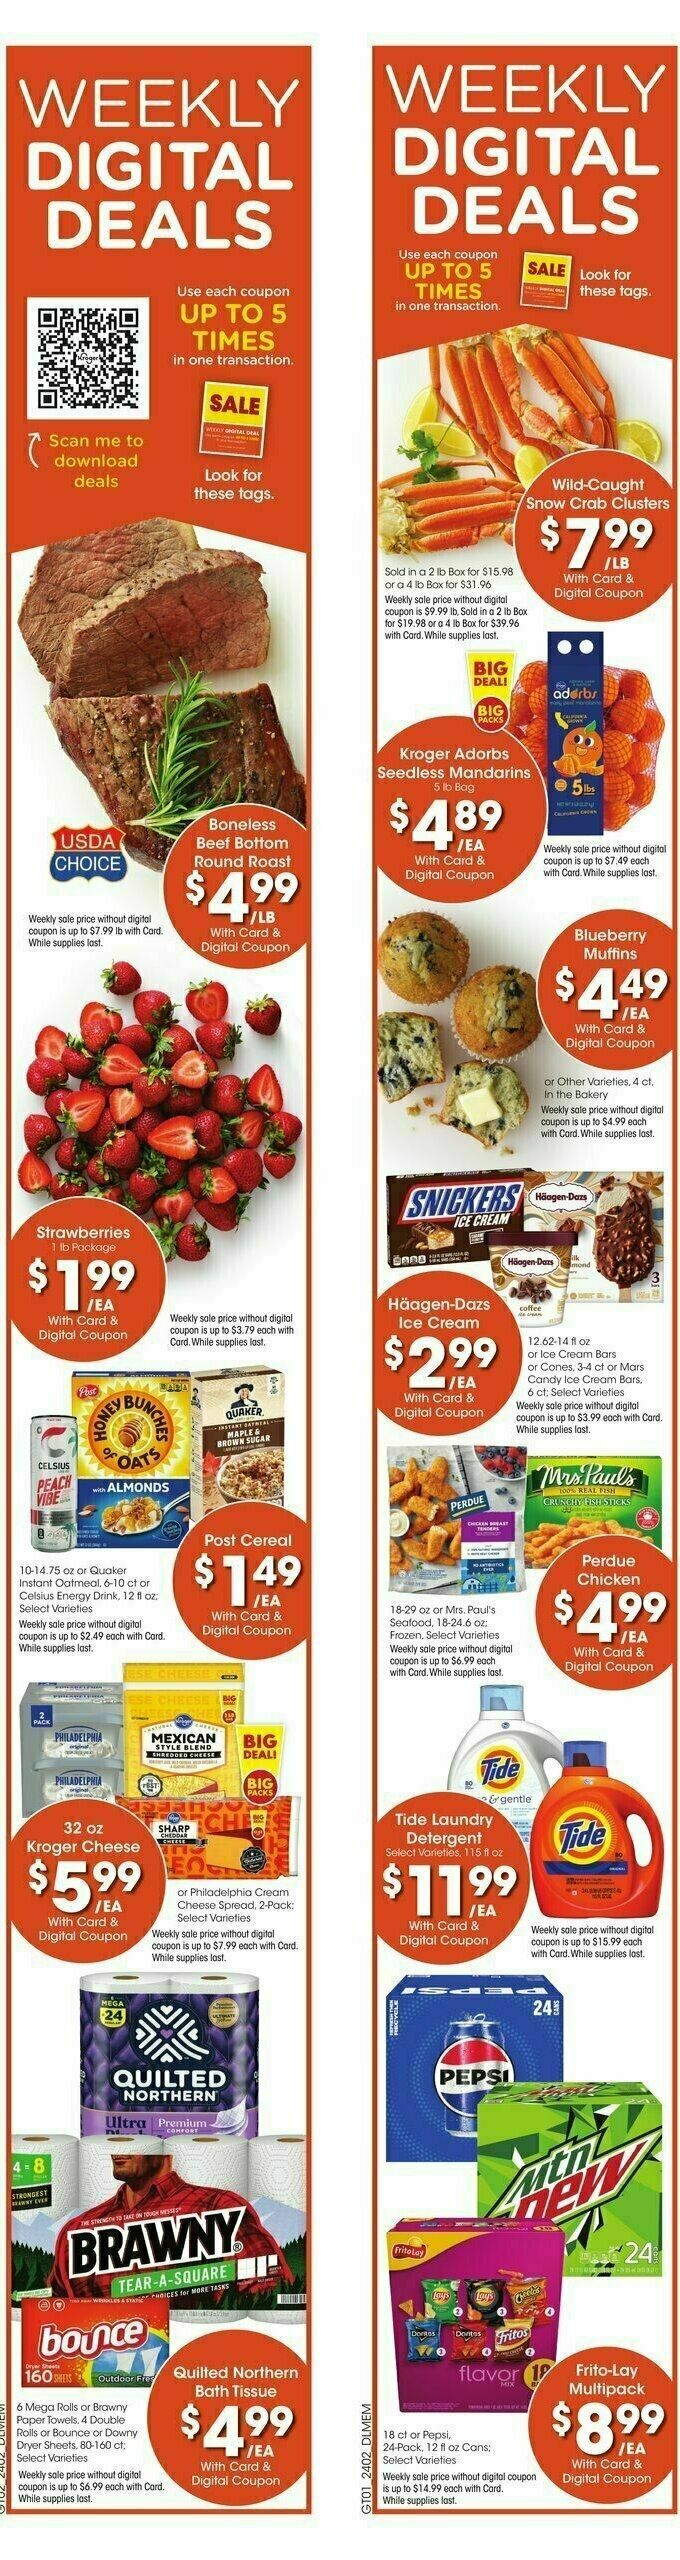 Kroger Weekly Ad from February 14